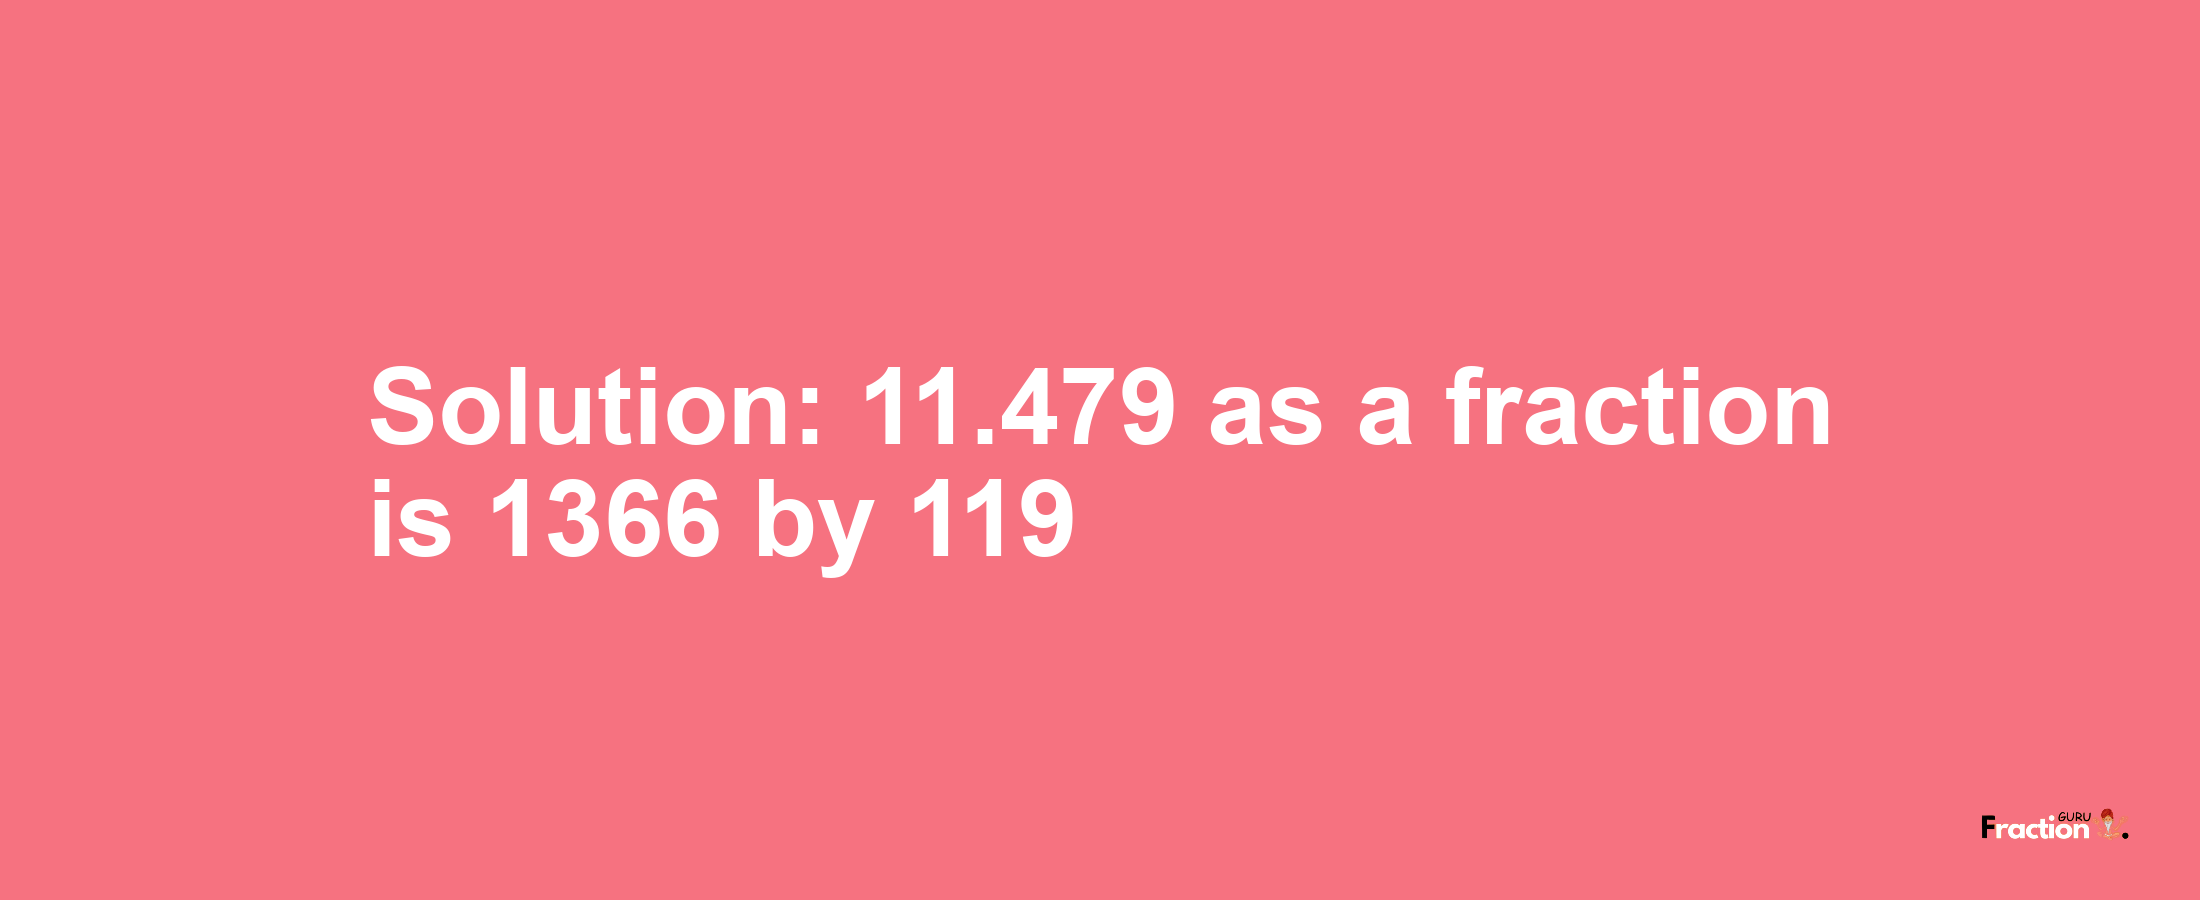 Solution:11.479 as a fraction is 1366/119